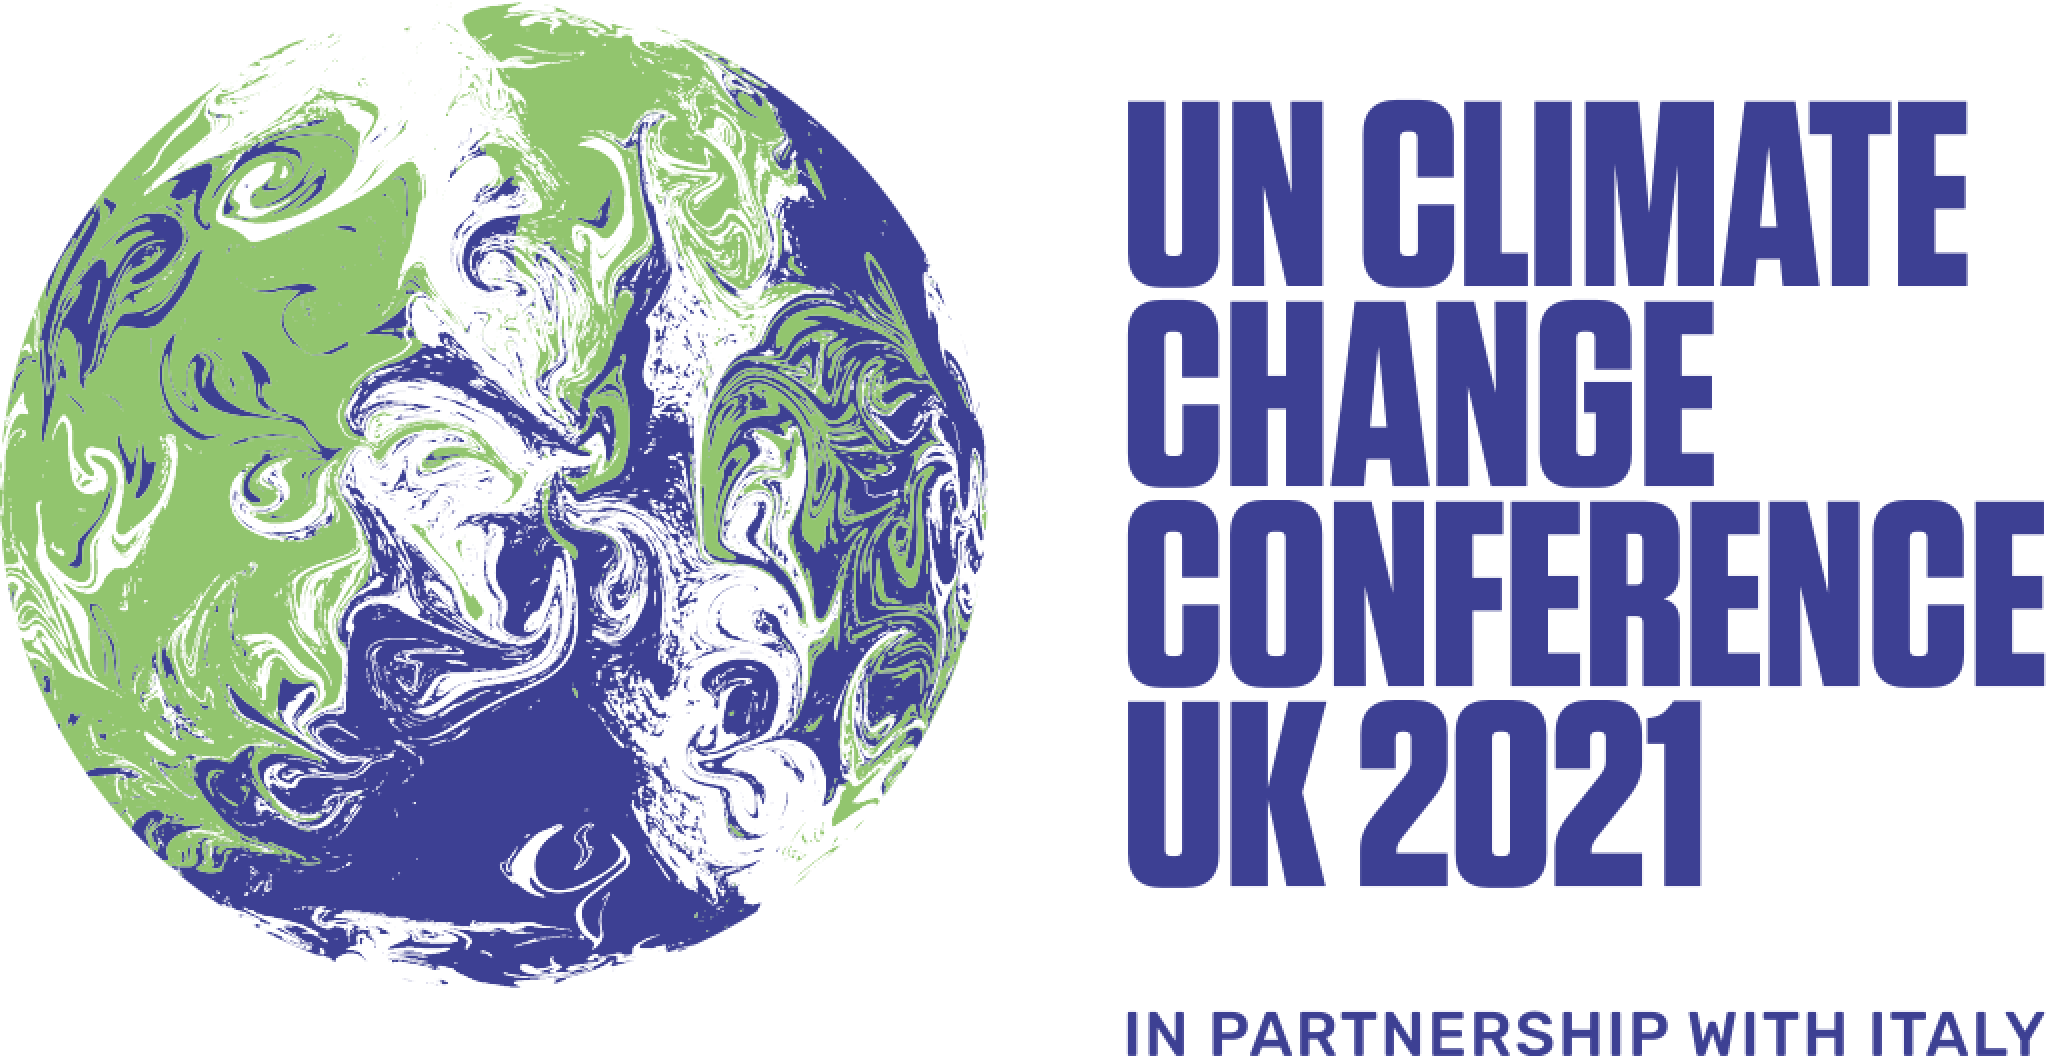 Image credit: COP26 Logo from Wiki Commons